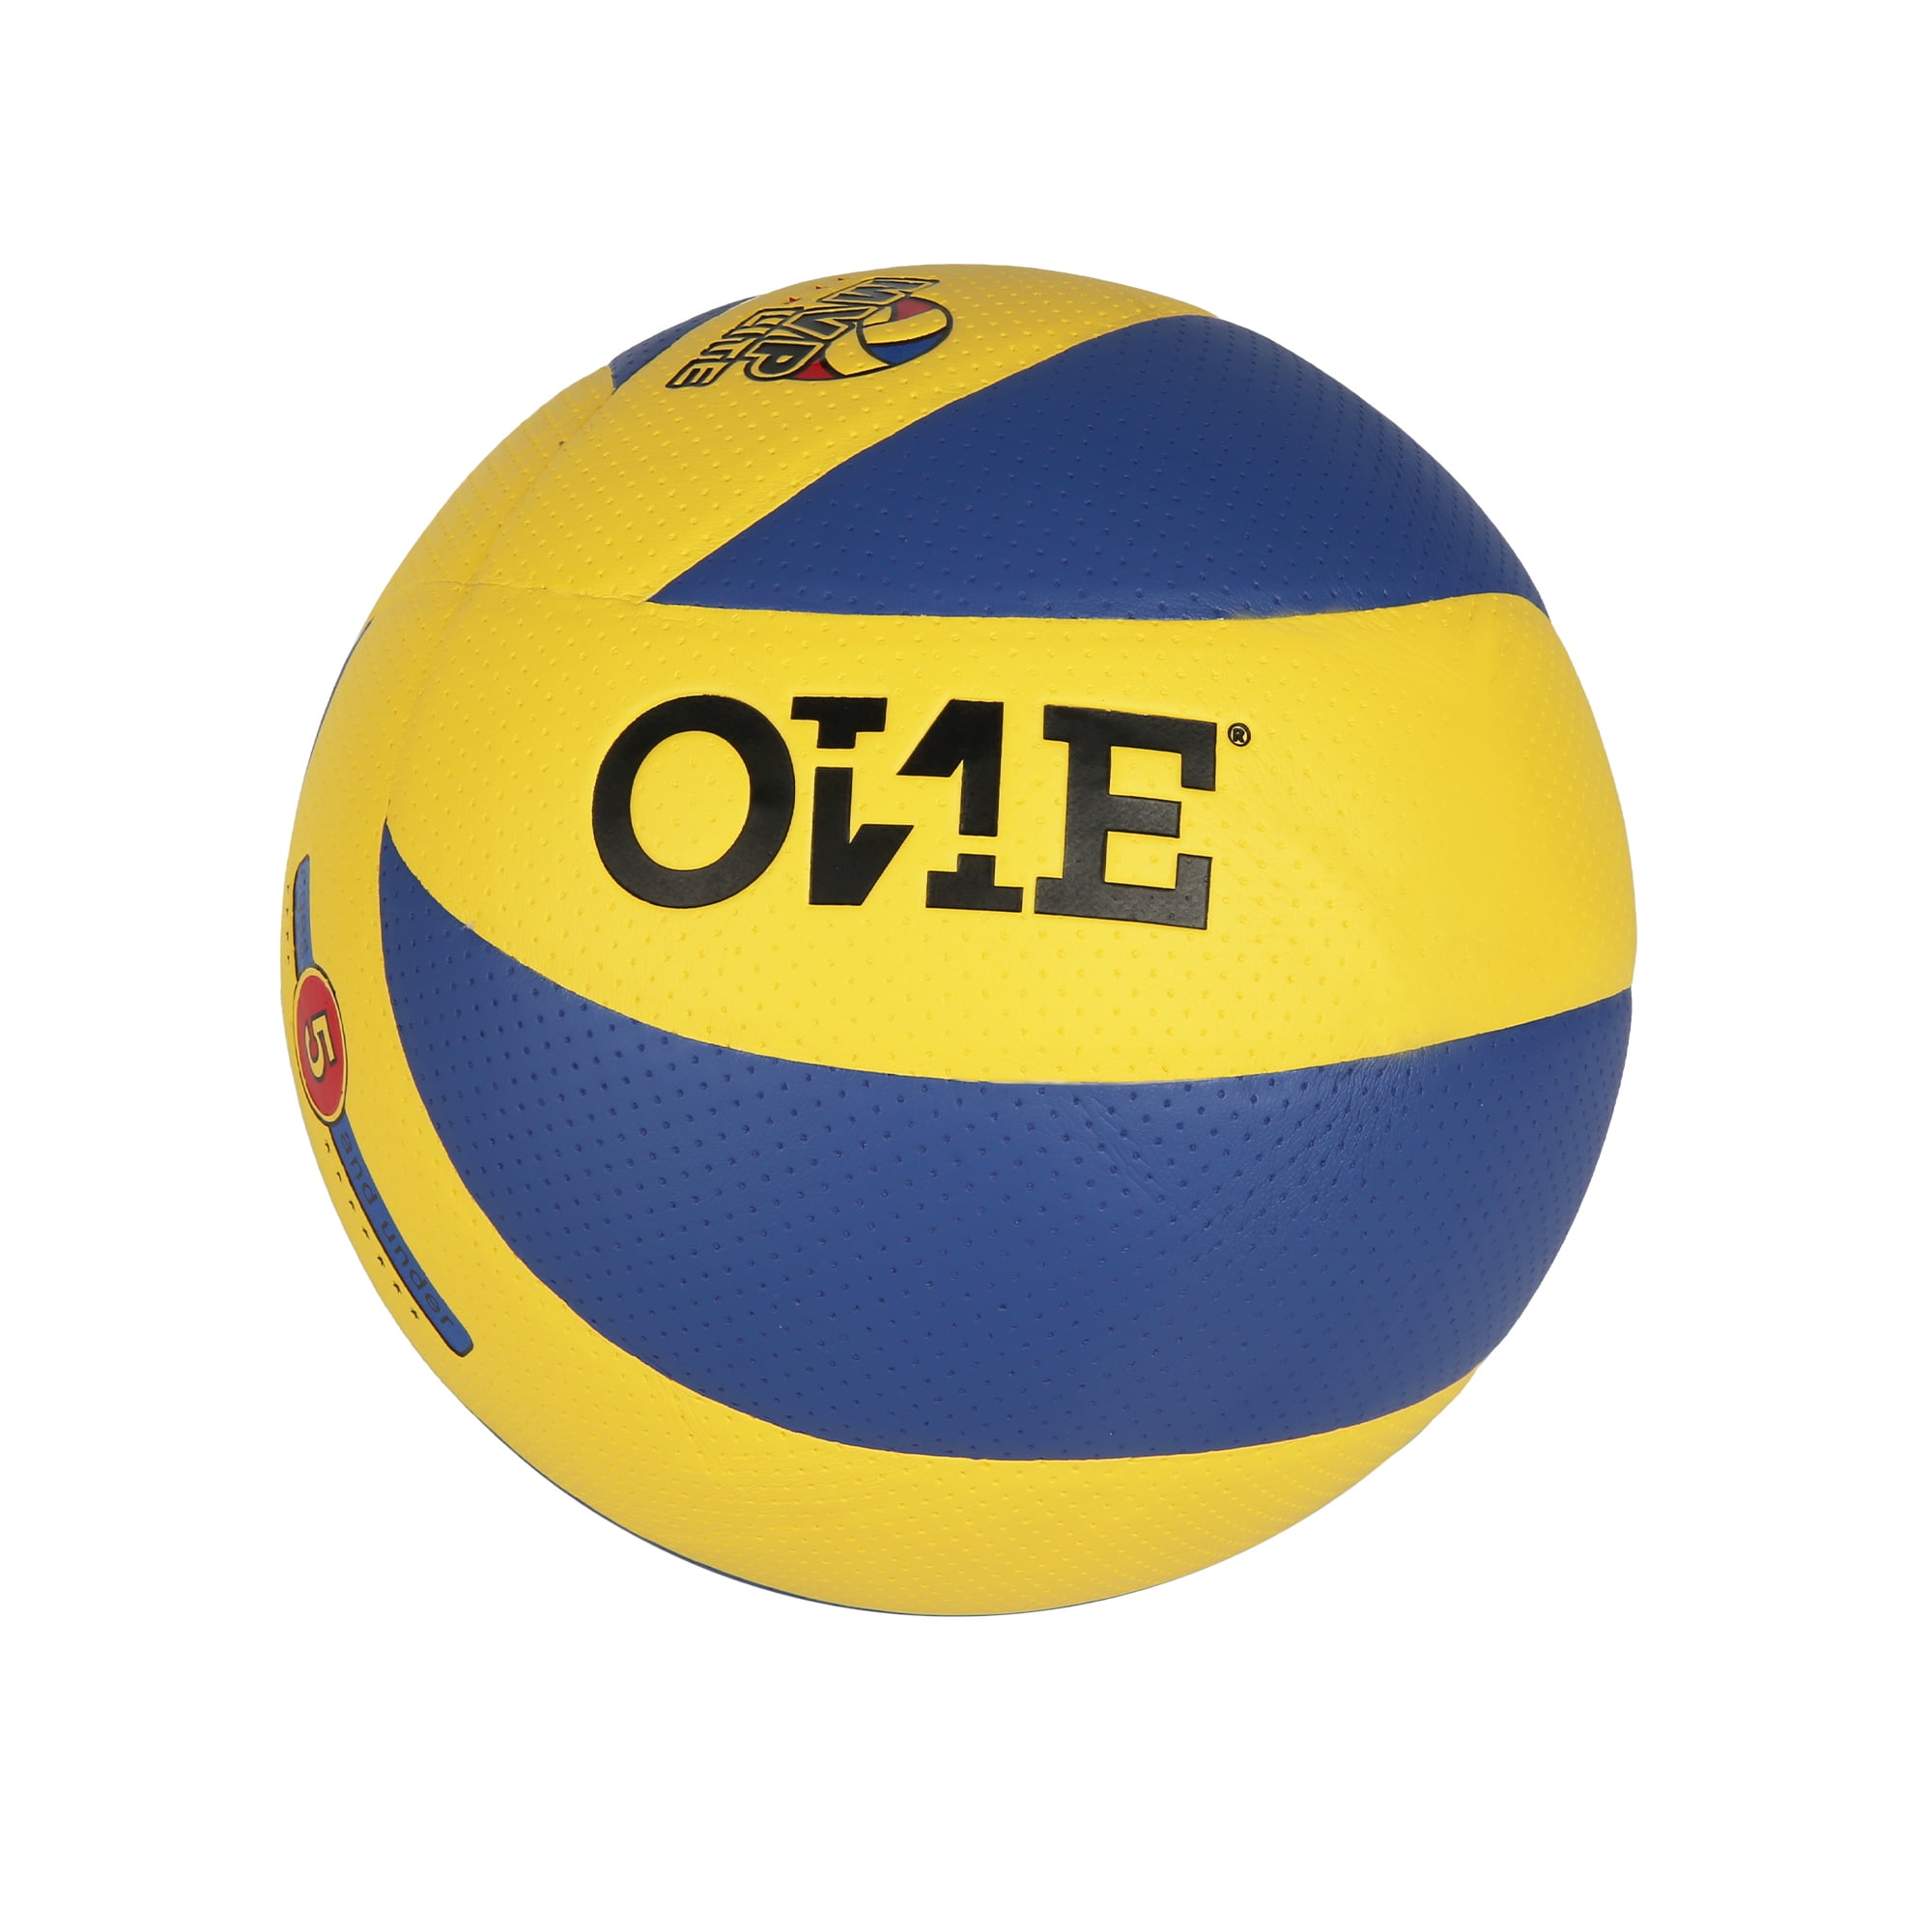 Soft Training Volleyball for Kids Youth Play Games on School Backyard and Beach Volleyballs Official Size 5,Inddor Outdoor Volleyball for Adults Elders 